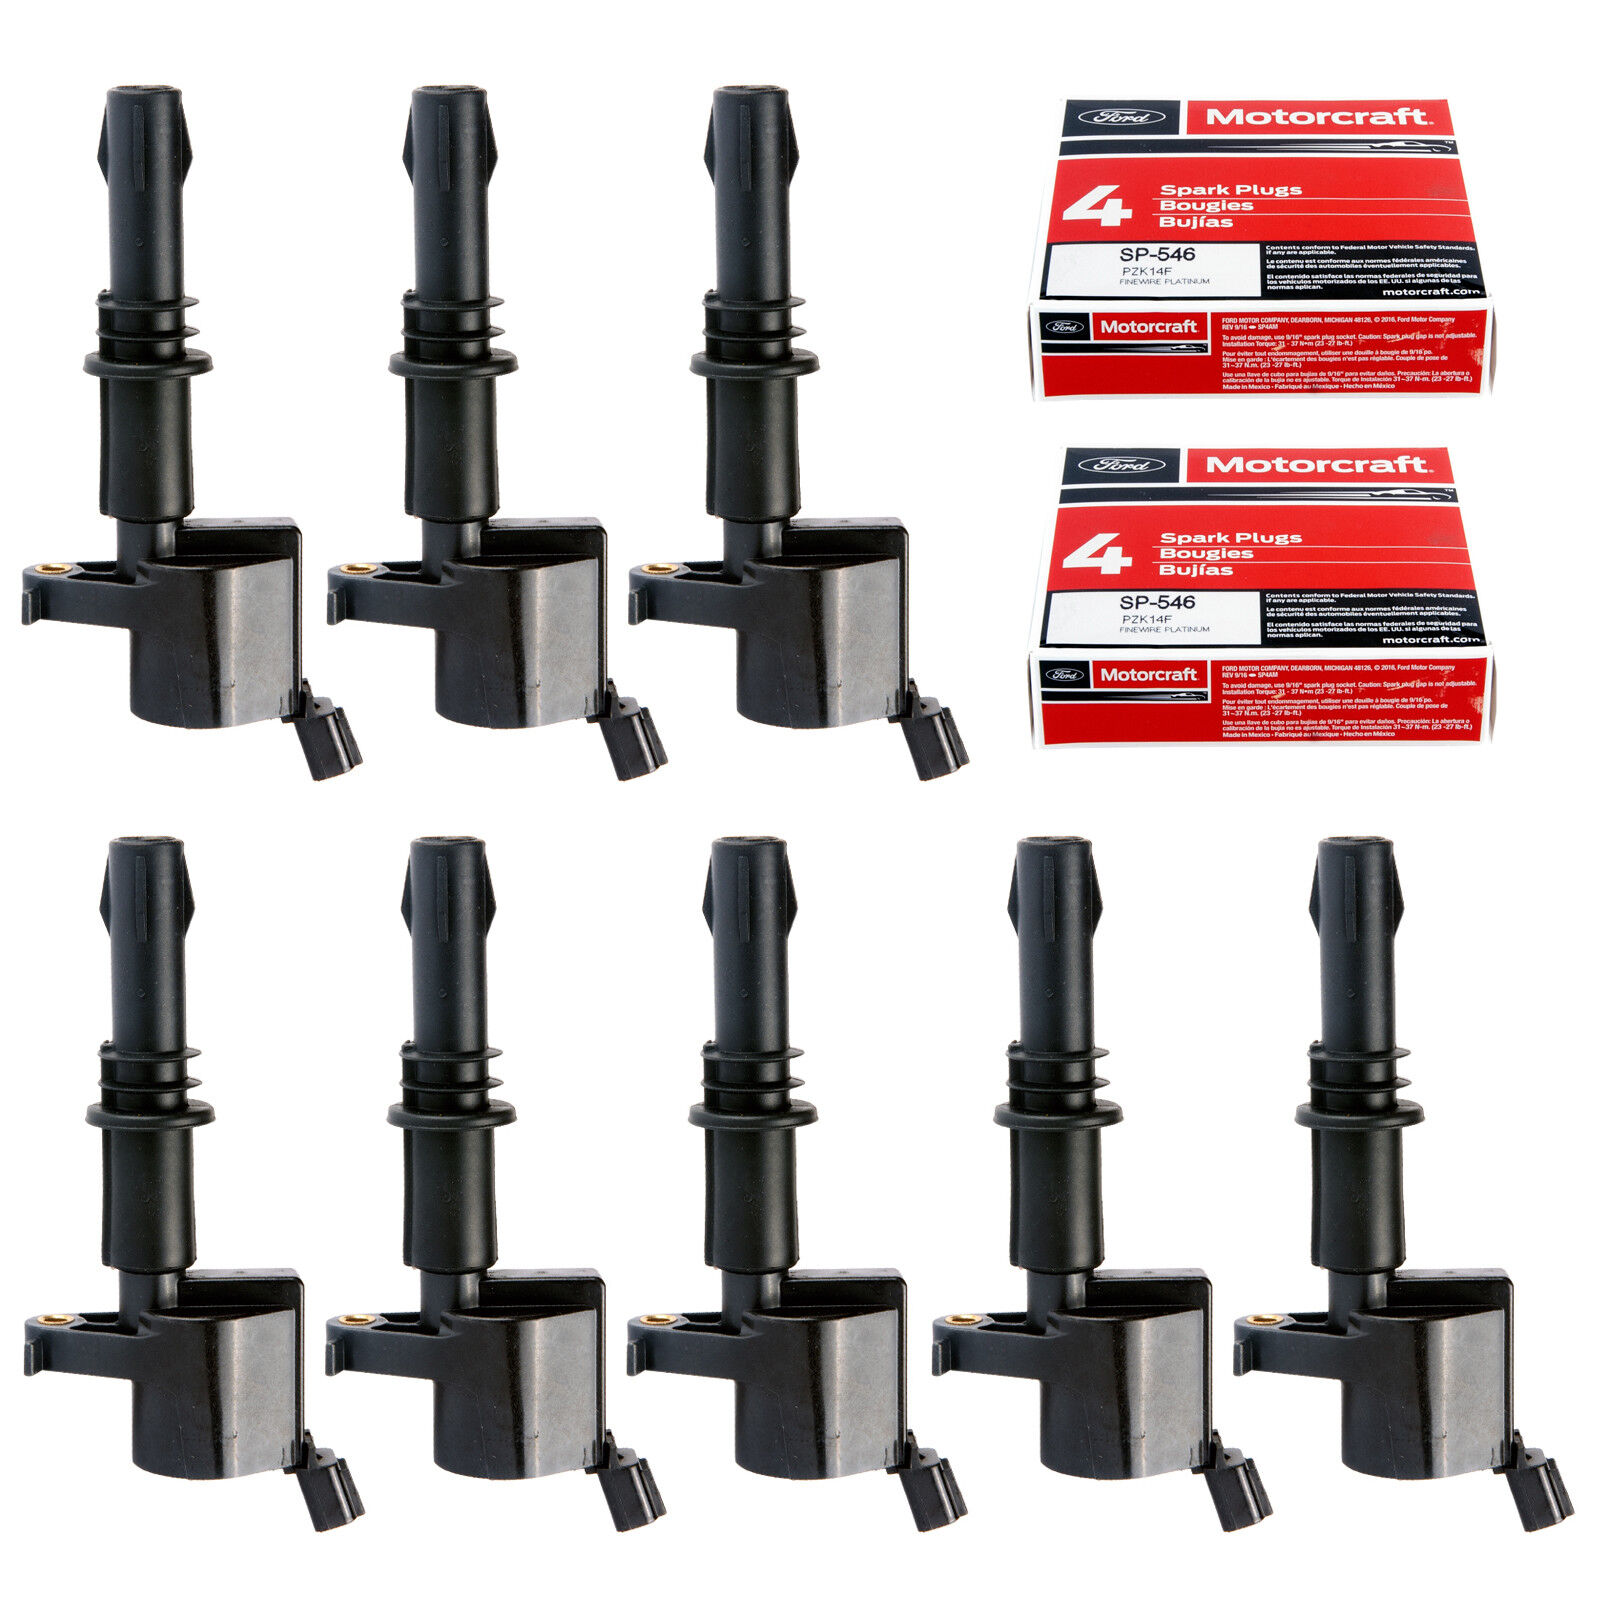 8 Ignition Coils DG511 & 8 Motorcraft Spark Plugs SP515/SP546 PZH14F For Ford